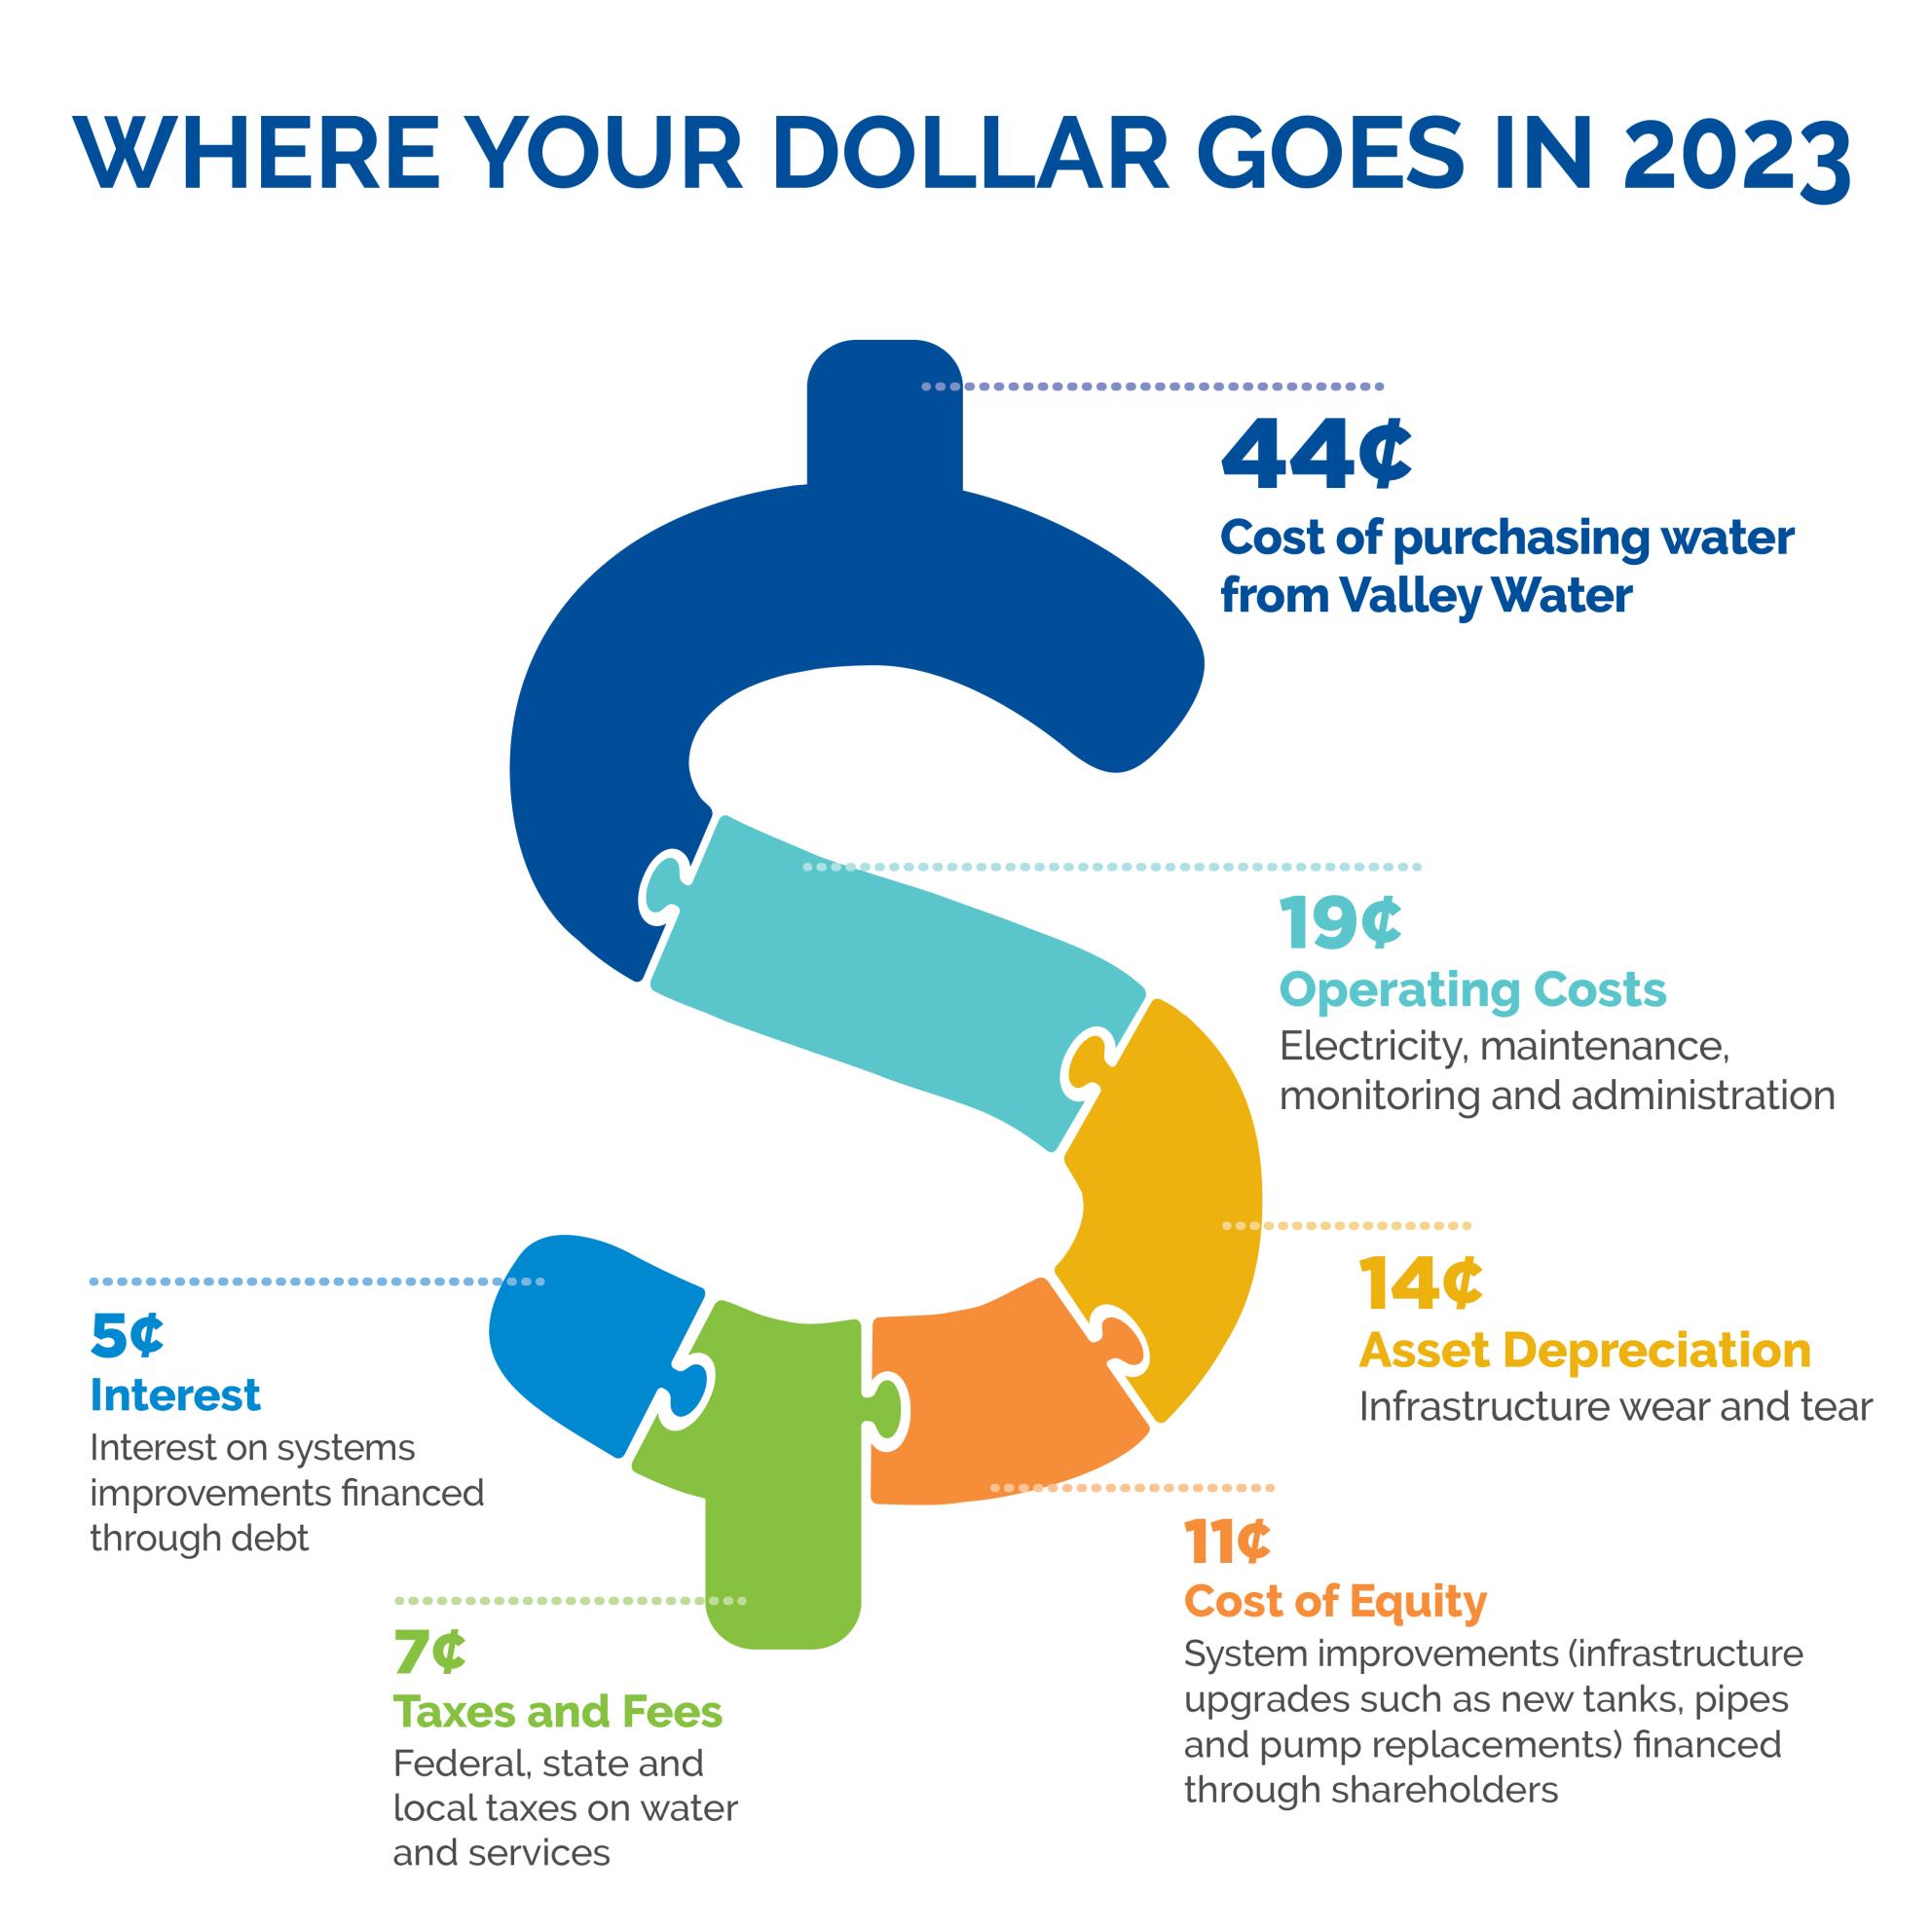 "Where your dollar goes in 2023" graphic